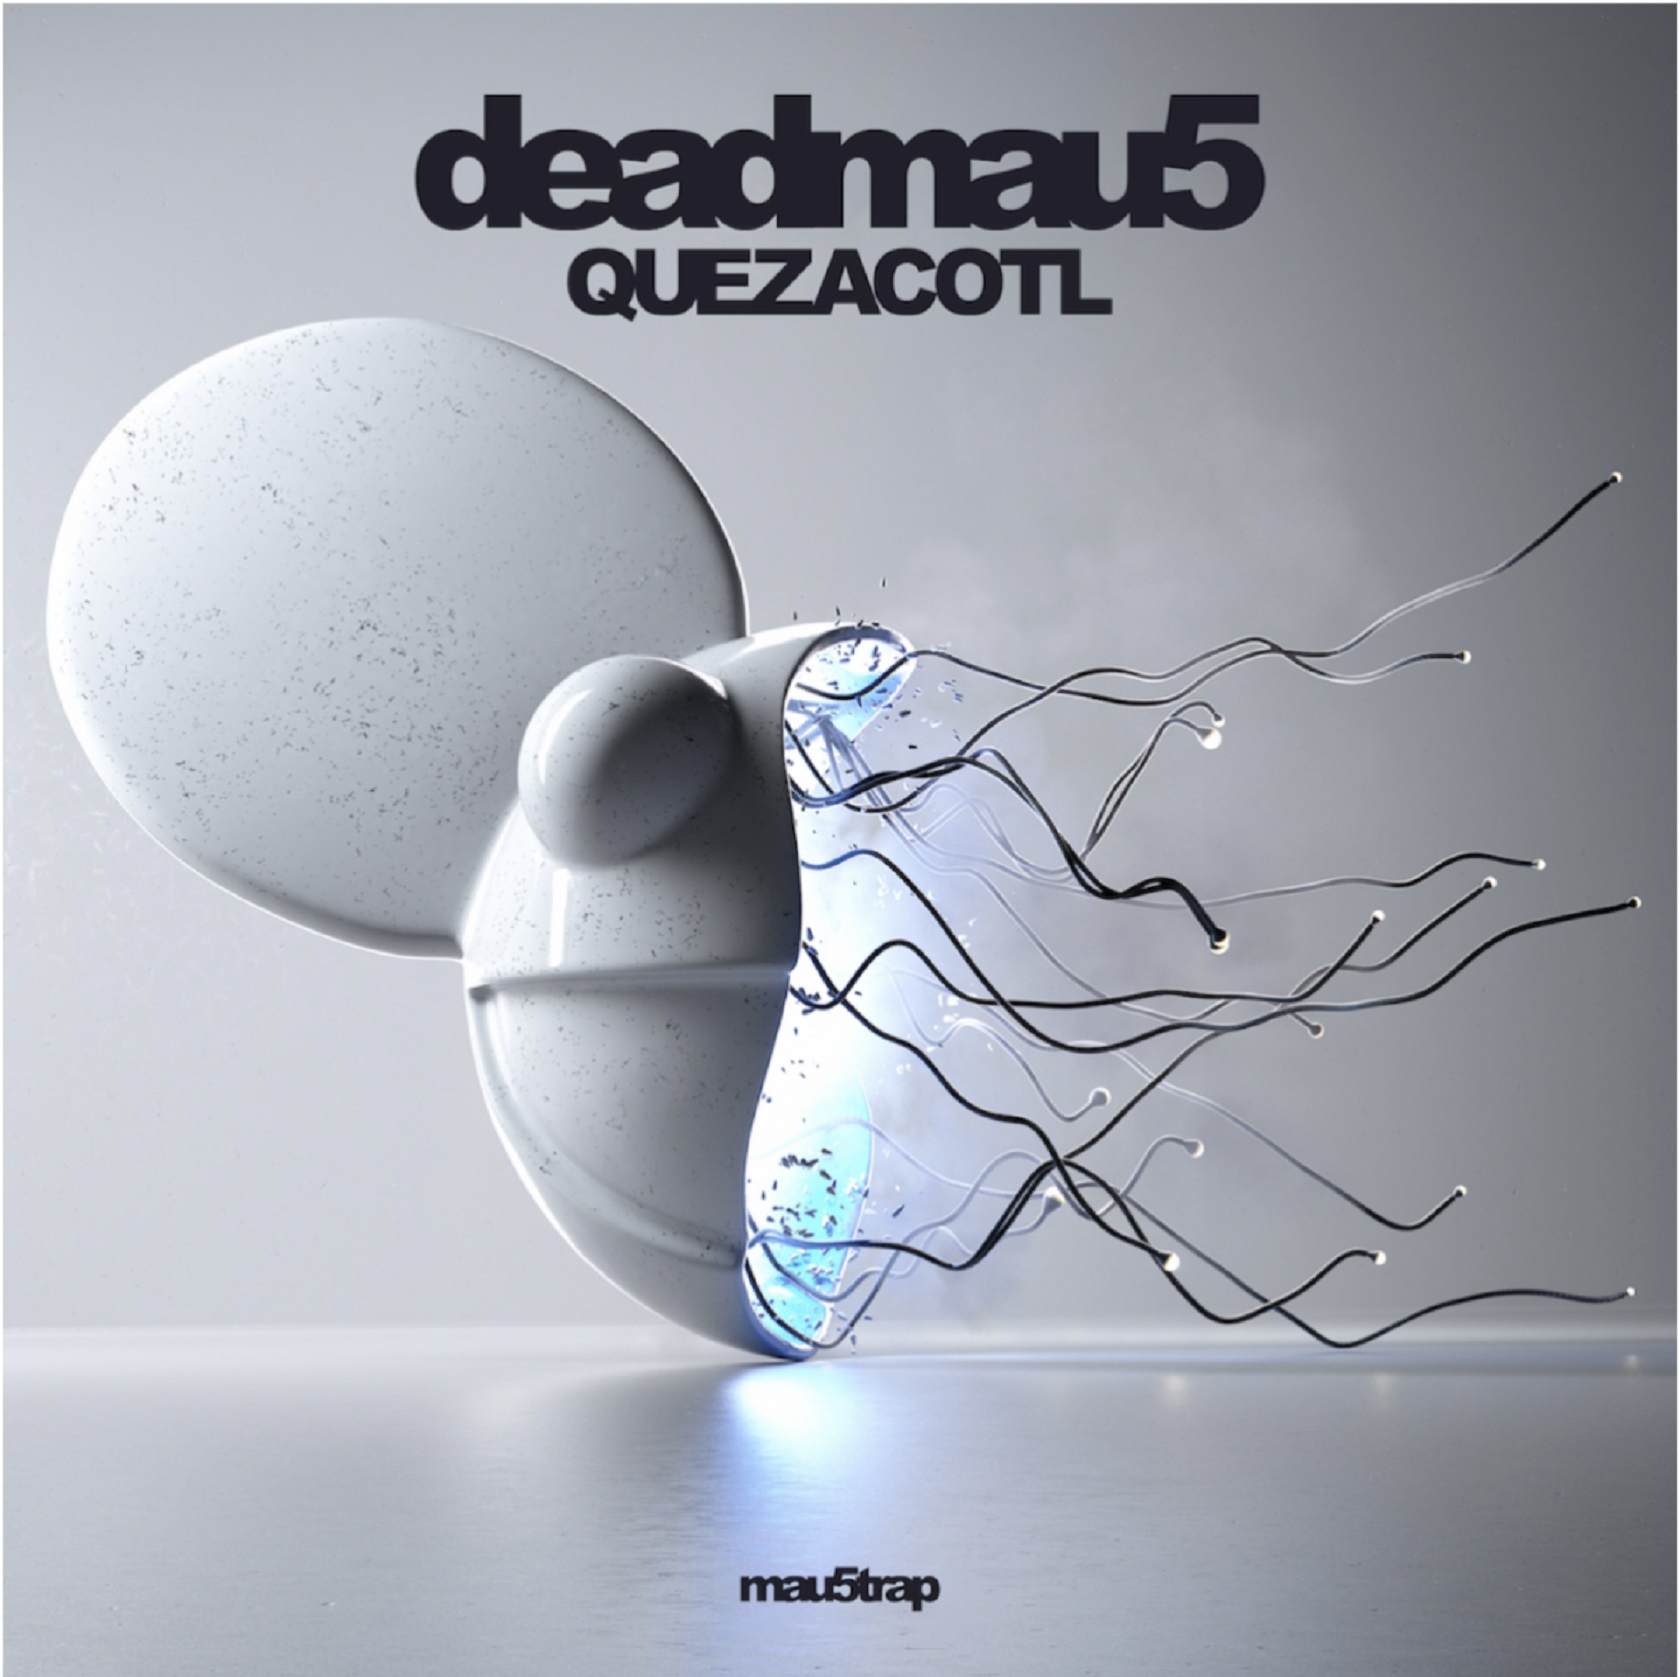 deadmau5 Returns To Form With New Single “Quezacotl” Out Today, July 5 On mau5trap